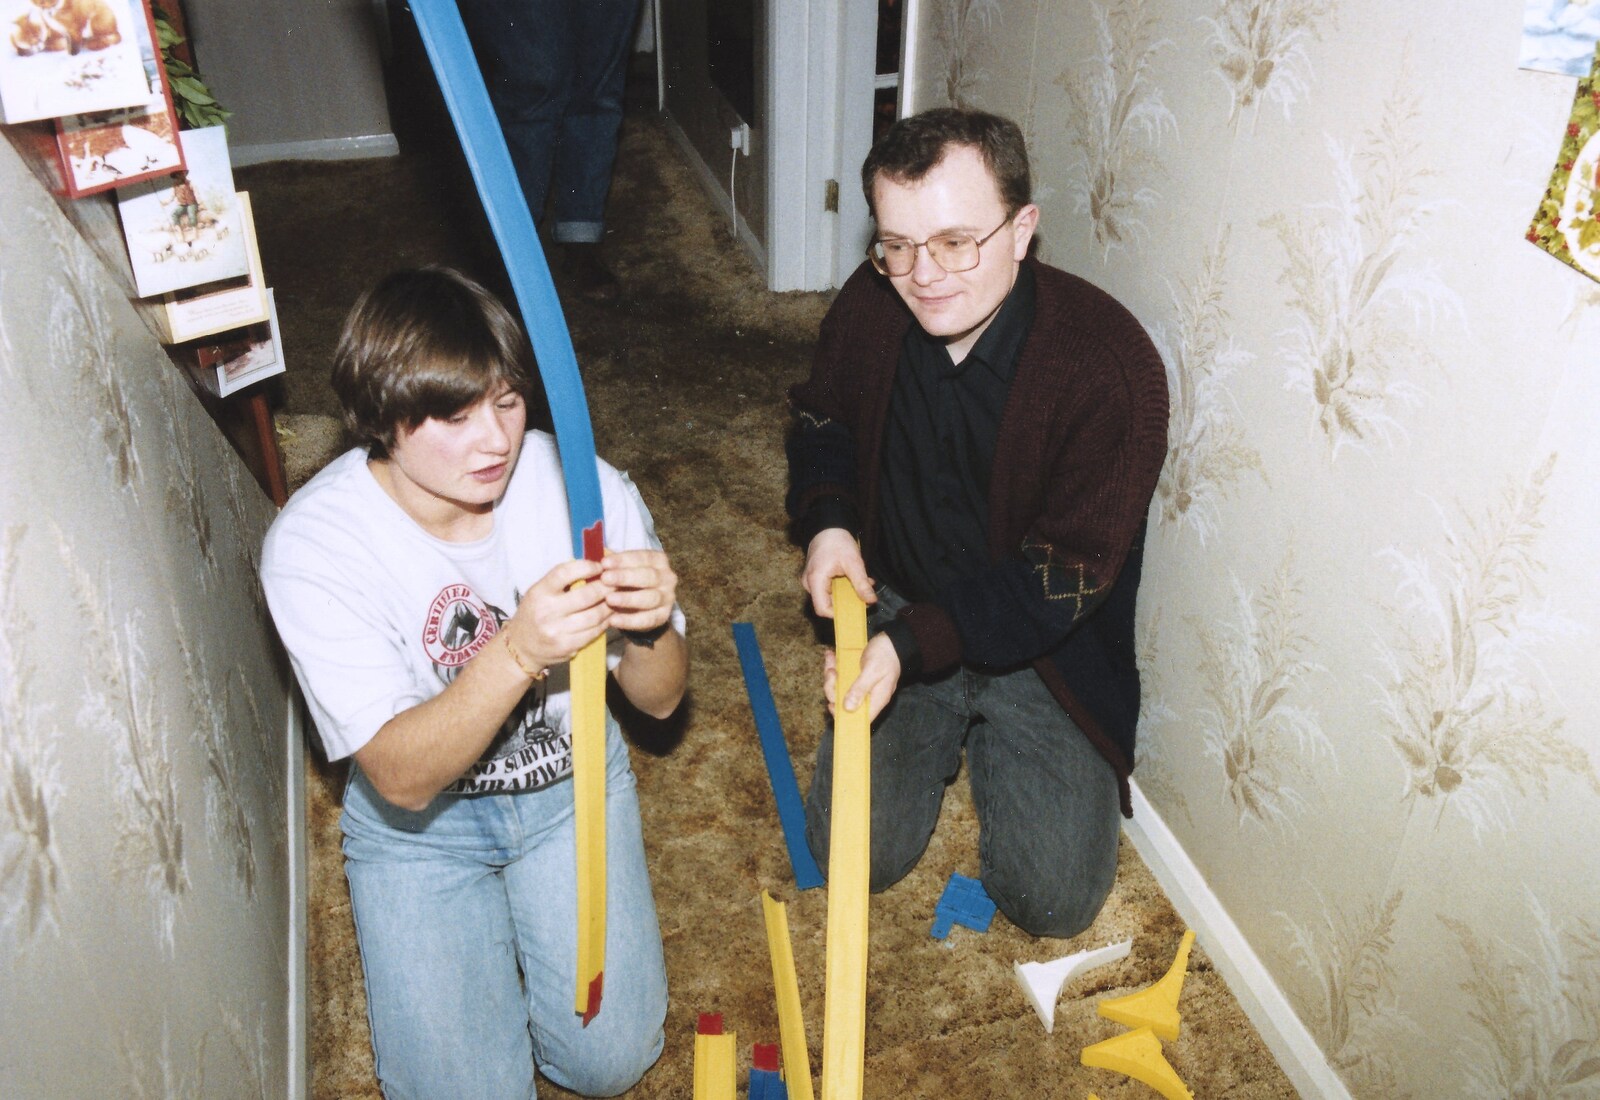 Hamish helps out with a bit of Hot Wheels from New Year's Eve at Phil's, Hordle, Hampshire - 31st December 1990